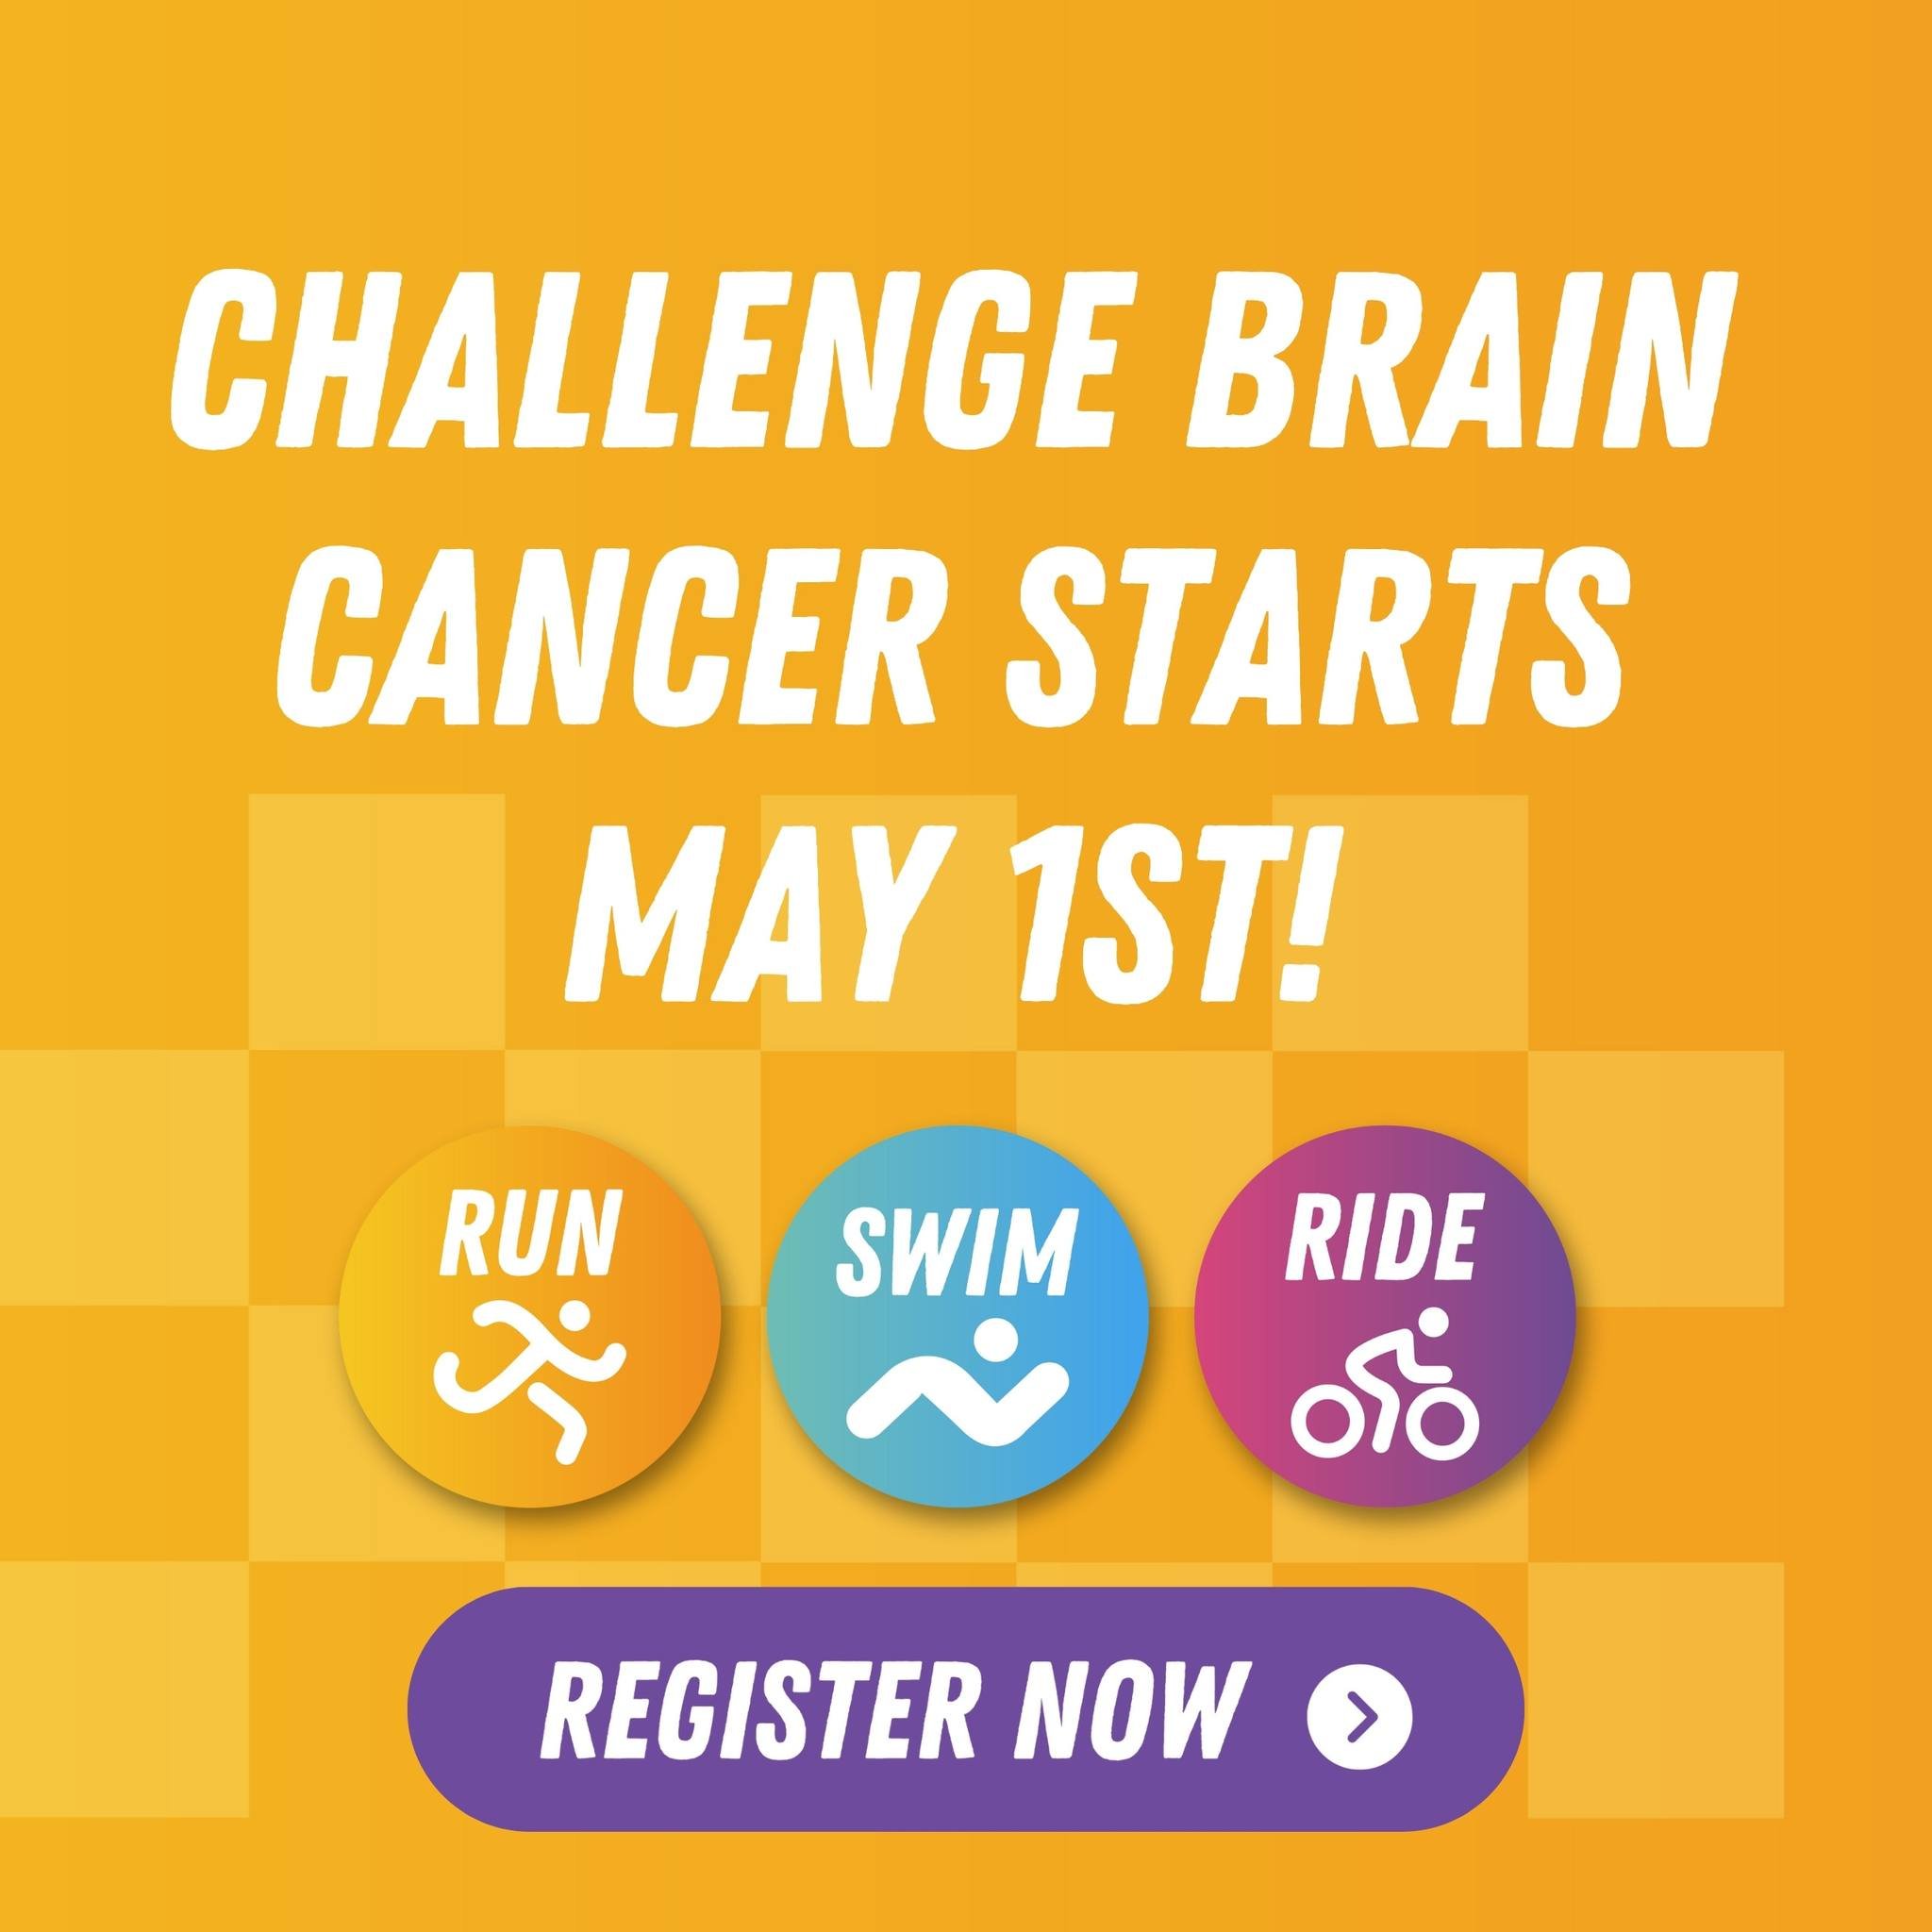 Two days to go! Brain cancer affects thousands of lives each year, but together, we can make a difference. By participating in Challenge Brain Cancer 2024, you're not just getting active&mdash;you're joining a community dedicated to bringing hope and